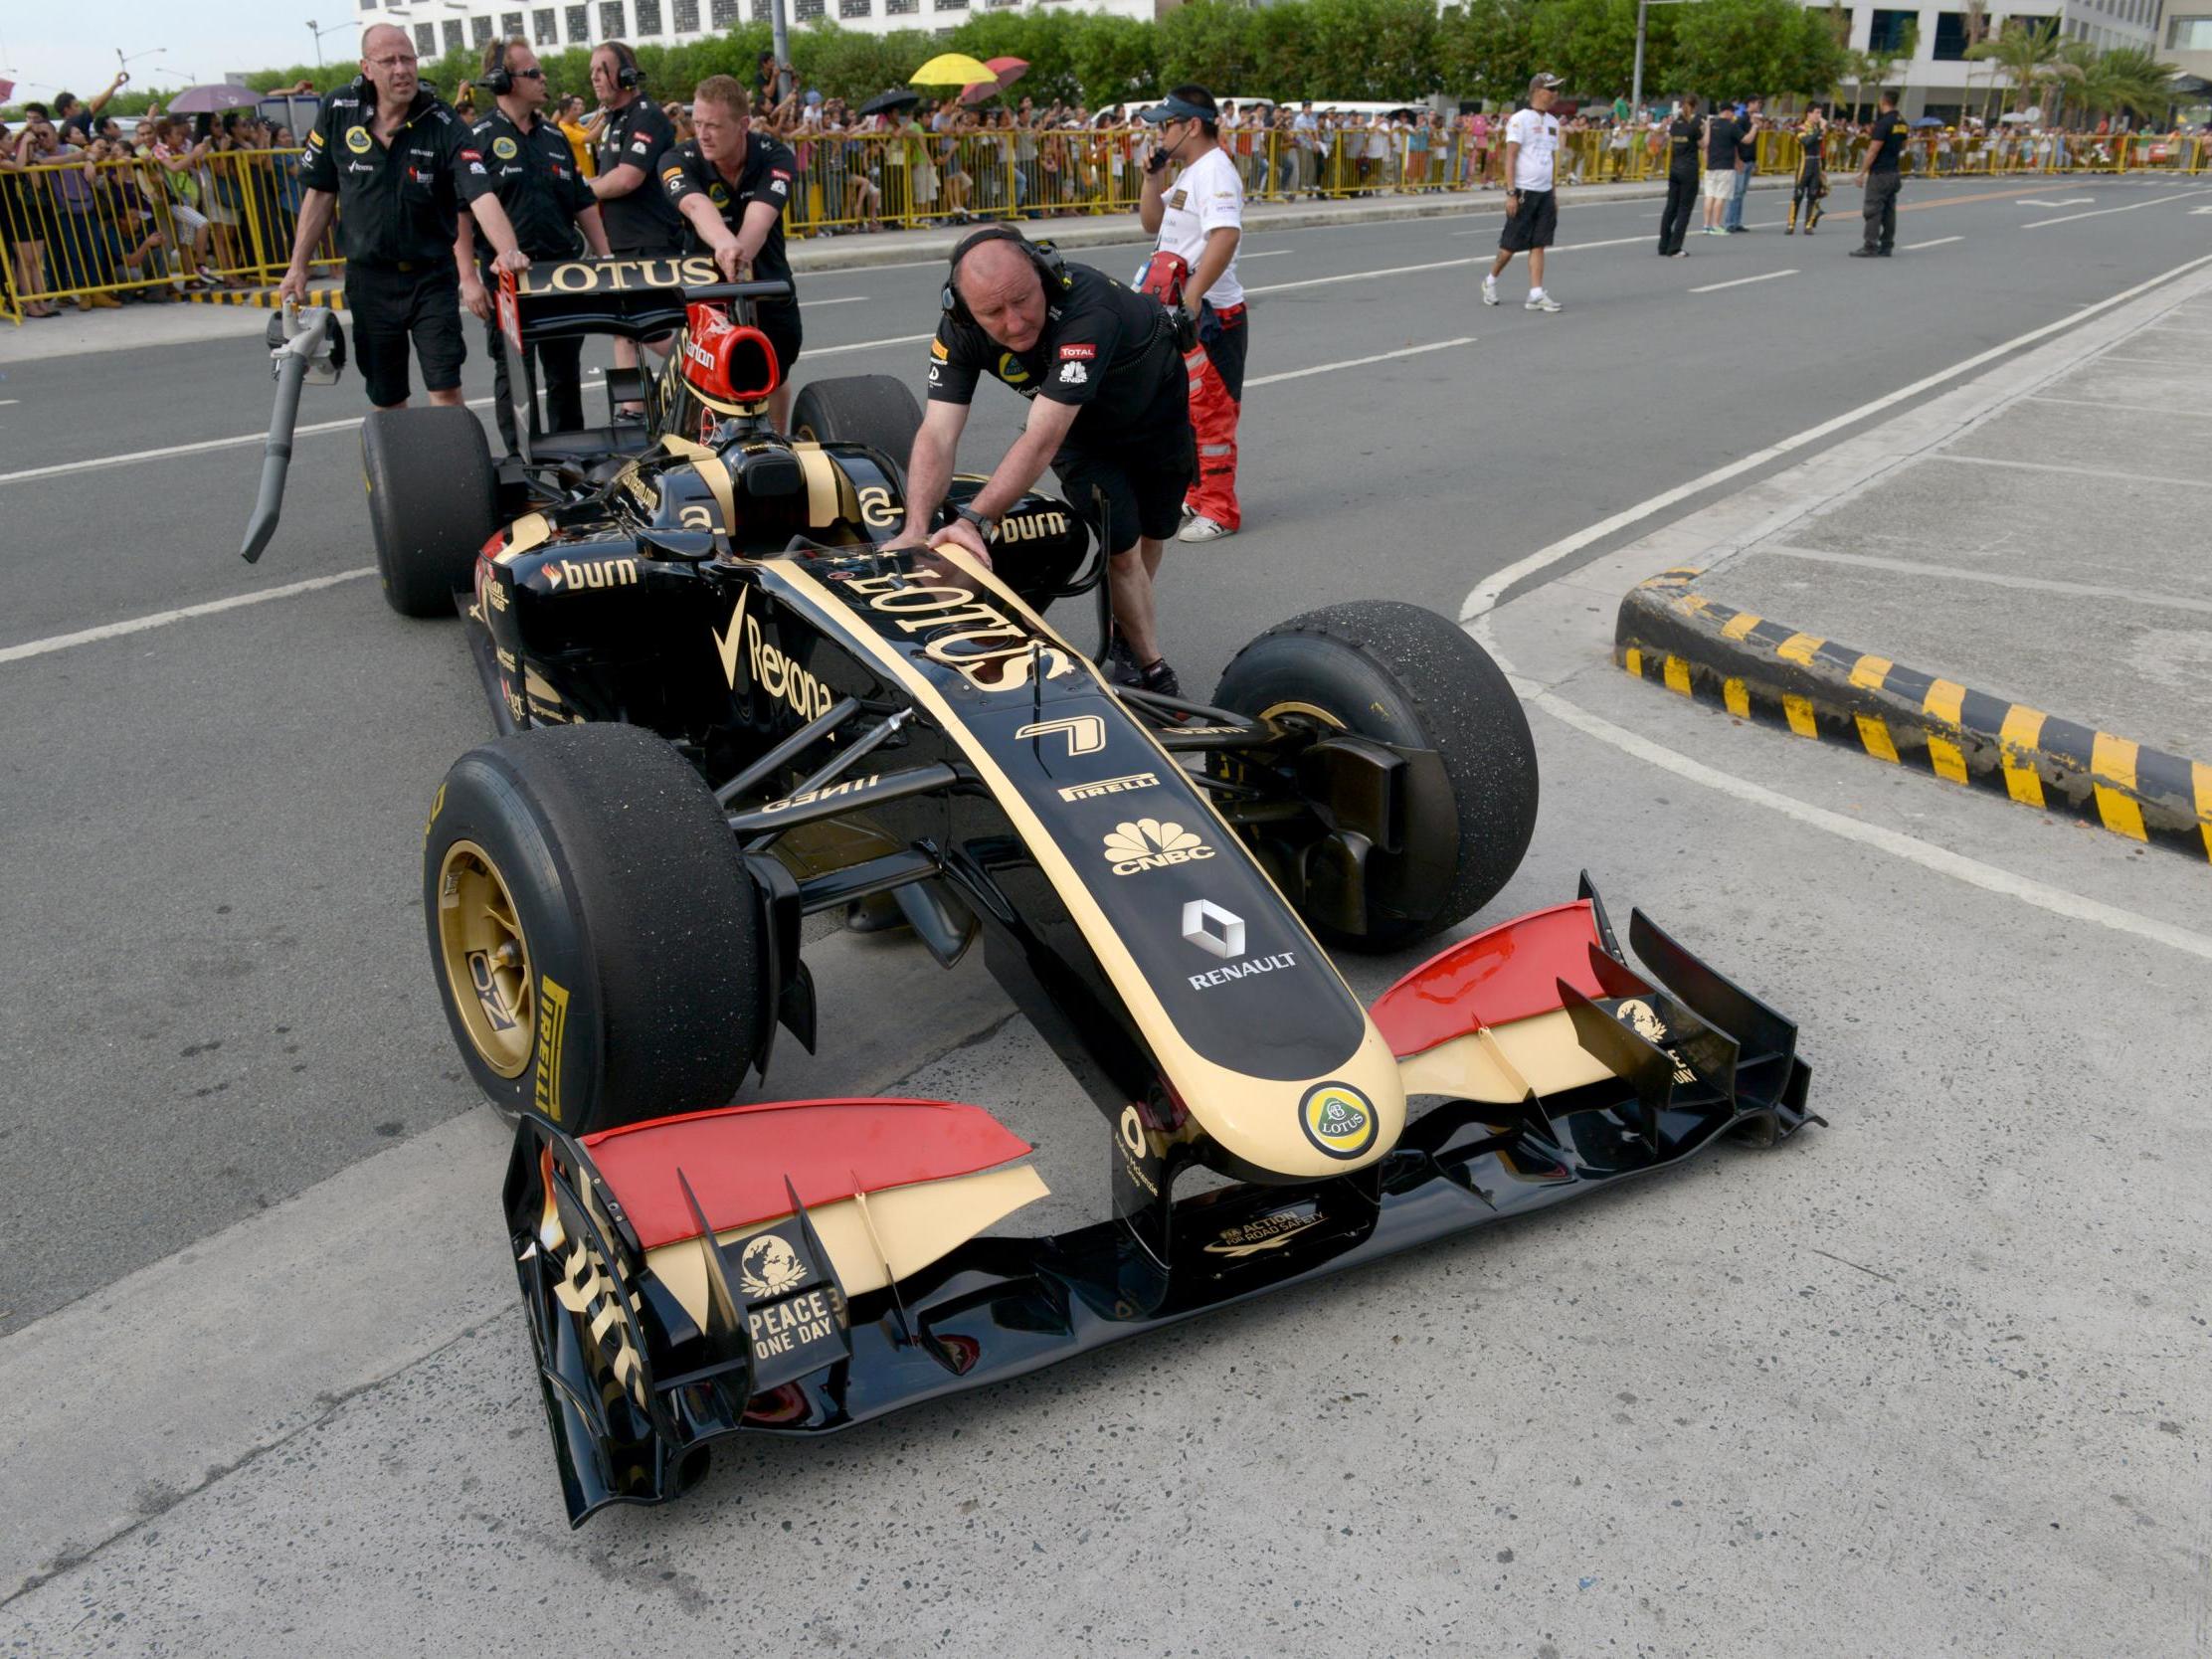 Mechanics push a Lotus Formula One car back to the pits after Filipino-Swiss racer Marlon Stockinger performed for fans during an event at the Manila Speed Show in Manila on May 4, 2013